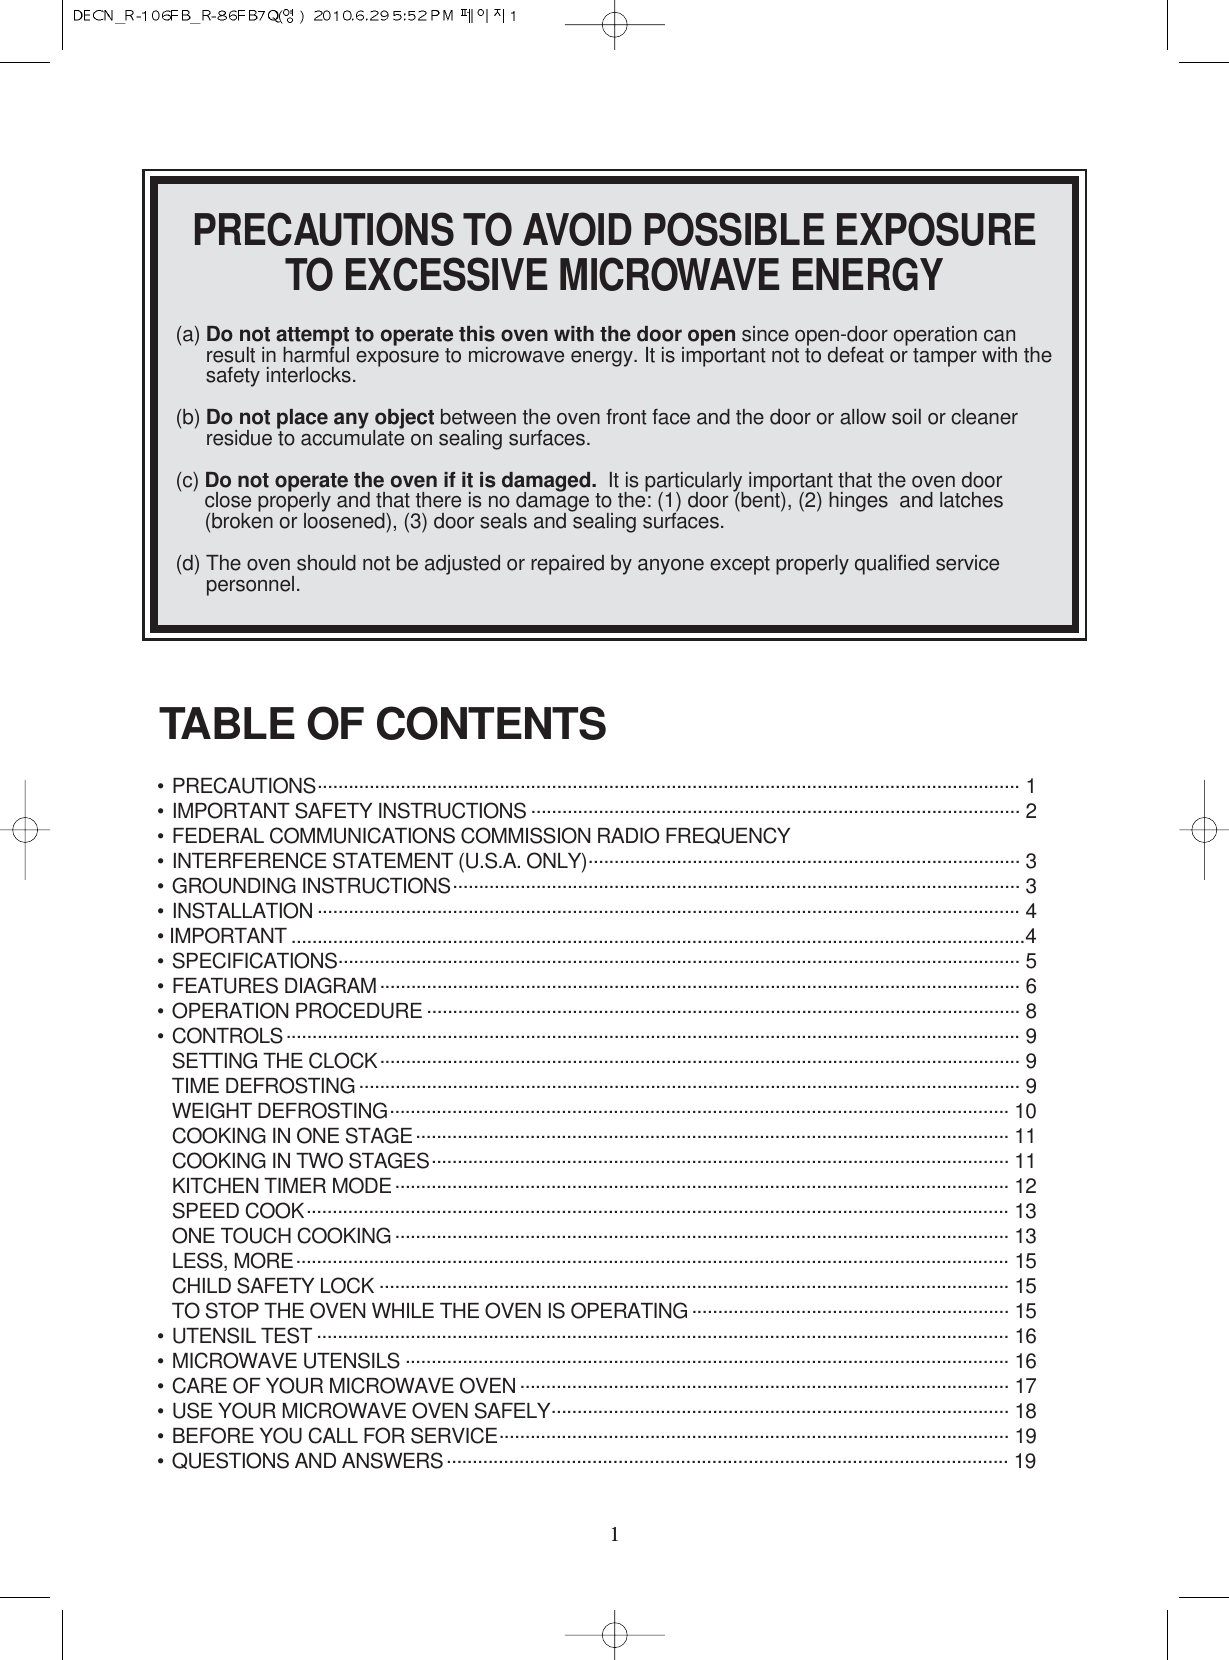 11PRECAUTIONS TO AVOID POSSIBLE EXPOSURETO EXCESSIVE MICROWAVE ENERGY(a) Do not attempt to operate this oven with the door open since open-door operation canresult in harmful exposure to microwave energy. It is important not to defeat or tamper with thesafety interlocks.(b) Do not place any object between the oven front face and the door or allow soil or cleanerresidue to accumulate on sealing surfaces.(c) Do not operate the oven if it is damaged. It is particularly important that the oven doorclose properly and that there is no damage to the: (1) door (bent), (2) hinges  and latches(broken or loosened), (3) door seals and sealing surfaces.(d) The oven should not be adjusted or repaired by anyone except properly qualified servicepersonnel.•PRECAUTIONS....................................................................................................................................... 1•IMPORTANT SAFETY INSTRUCTIONS .............................................................................................. 2•FEDERAL COMMUNICATIONS COMMISSION RADIO FREQUENCY•INTERFERENCE STATEMENT (U.S.A. ONLY)................................................................................... 3•GROUNDING INSTRUCTIONS............................................................................................................. 3•INSTALLATION ....................................................................................................................................... 4• IMPORTANT .............................................................................................................................................4•SPECIFICATIONS................................................................................................................................... 5•FEATURES DIAGRAM........................................................................................................................... 6•OPERATION PROCEDURE .................................................................................................................. 8•CONTROLS............................................................................................................................................. 9SETTING THE CLOCK........................................................................................................................... 9 TIME DEFROSTING ............................................................................................................................... 9 WEIGHT DEFROSTING....................................................................................................................... 10COOKING IN ONE STAGE.................................................................................................................. 11COOKING IN TWO STAGES............................................................................................................... 11KITCHEN TIMER MODE...................................................................................................................... 12SPEED COOK....................................................................................................................................... 13ONE TOUCH COOKING ...................................................................................................................... 13LESS, MORE......................................................................................................................................... 15CHILD SAFETY LOCK ......................................................................................................................... 15TO STOP THE OVEN WHILE THE OVEN IS OPERATING ............................................................. 15•UTENSIL TEST ..................................................................................................................................... 16•MICROWAVE UTENSILS .................................................................................................................... 16•CARE OF YOUR MICROWAVE OVEN .............................................................................................. 17•USE YOUR MICROWAVE OVEN SAFELY........................................................................................ 18•BEFORE YOU CALL FOR SERVICE.................................................................................................. 19•QUESTIONS AND ANSWERS............................................................................................................ 19TABLE OF CONTENTS